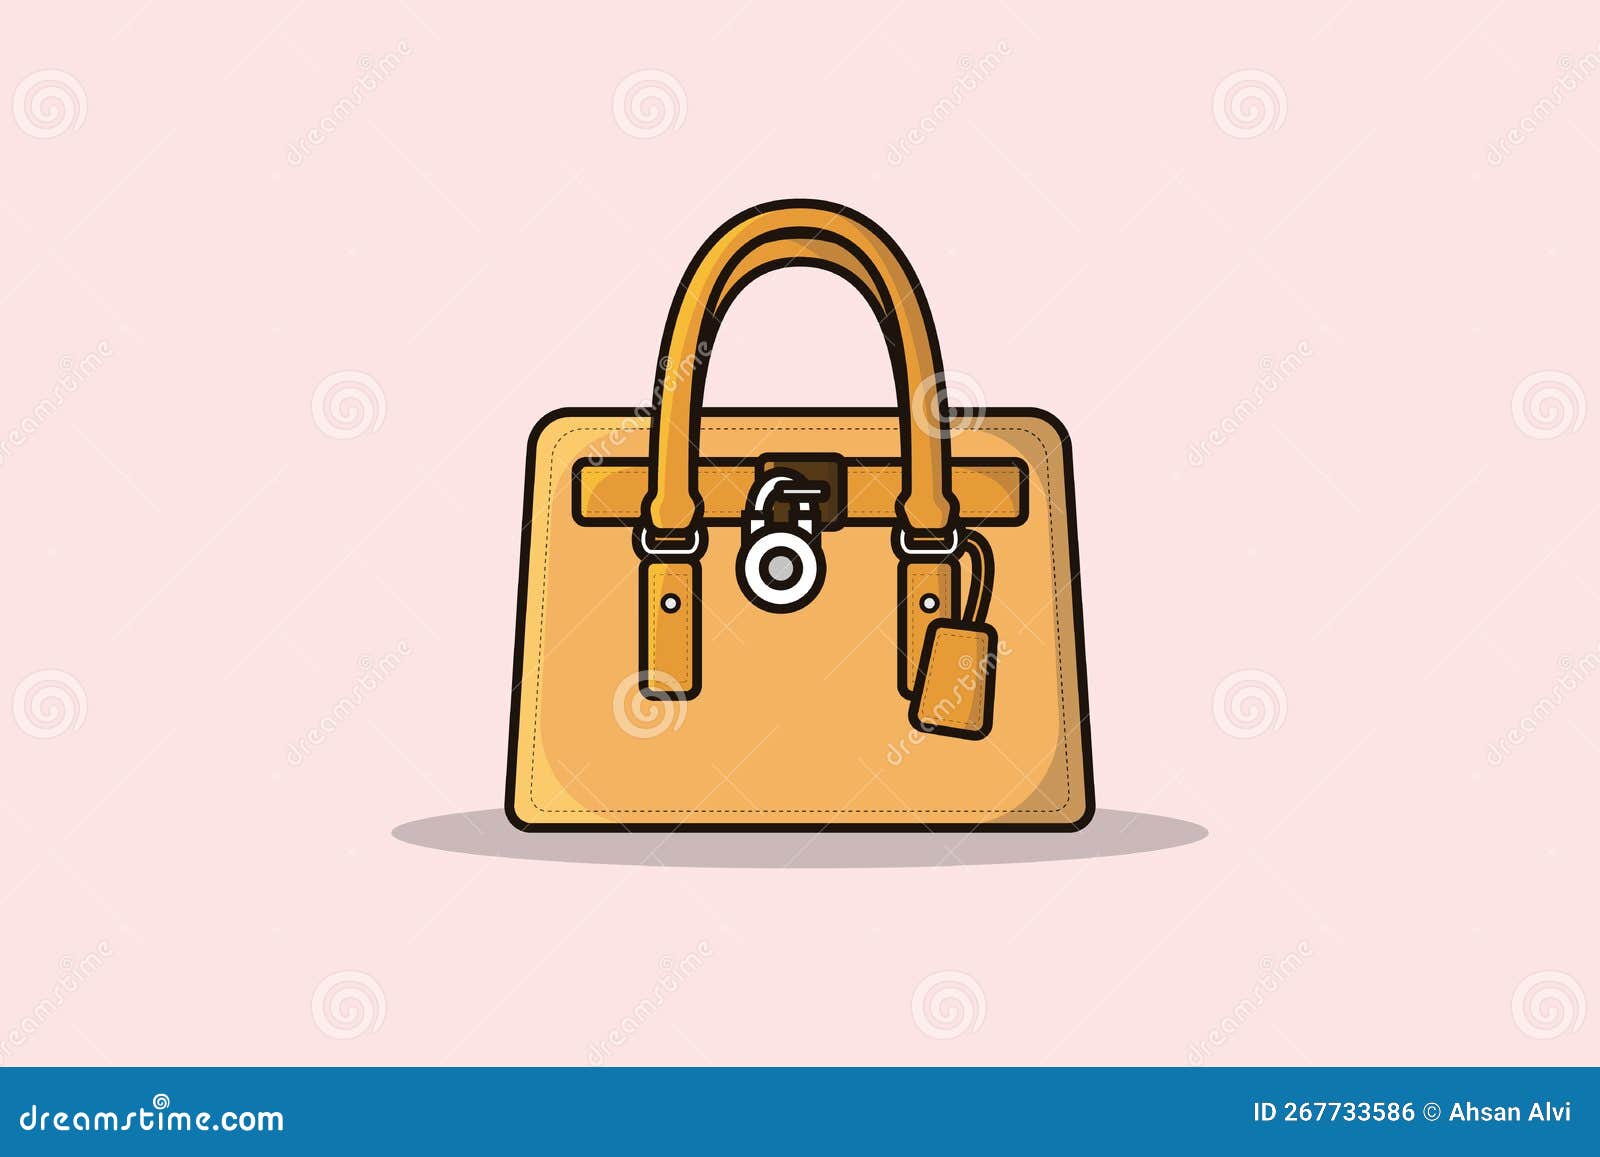 Beautiful leather bags, totes and purses – Beautiful bags